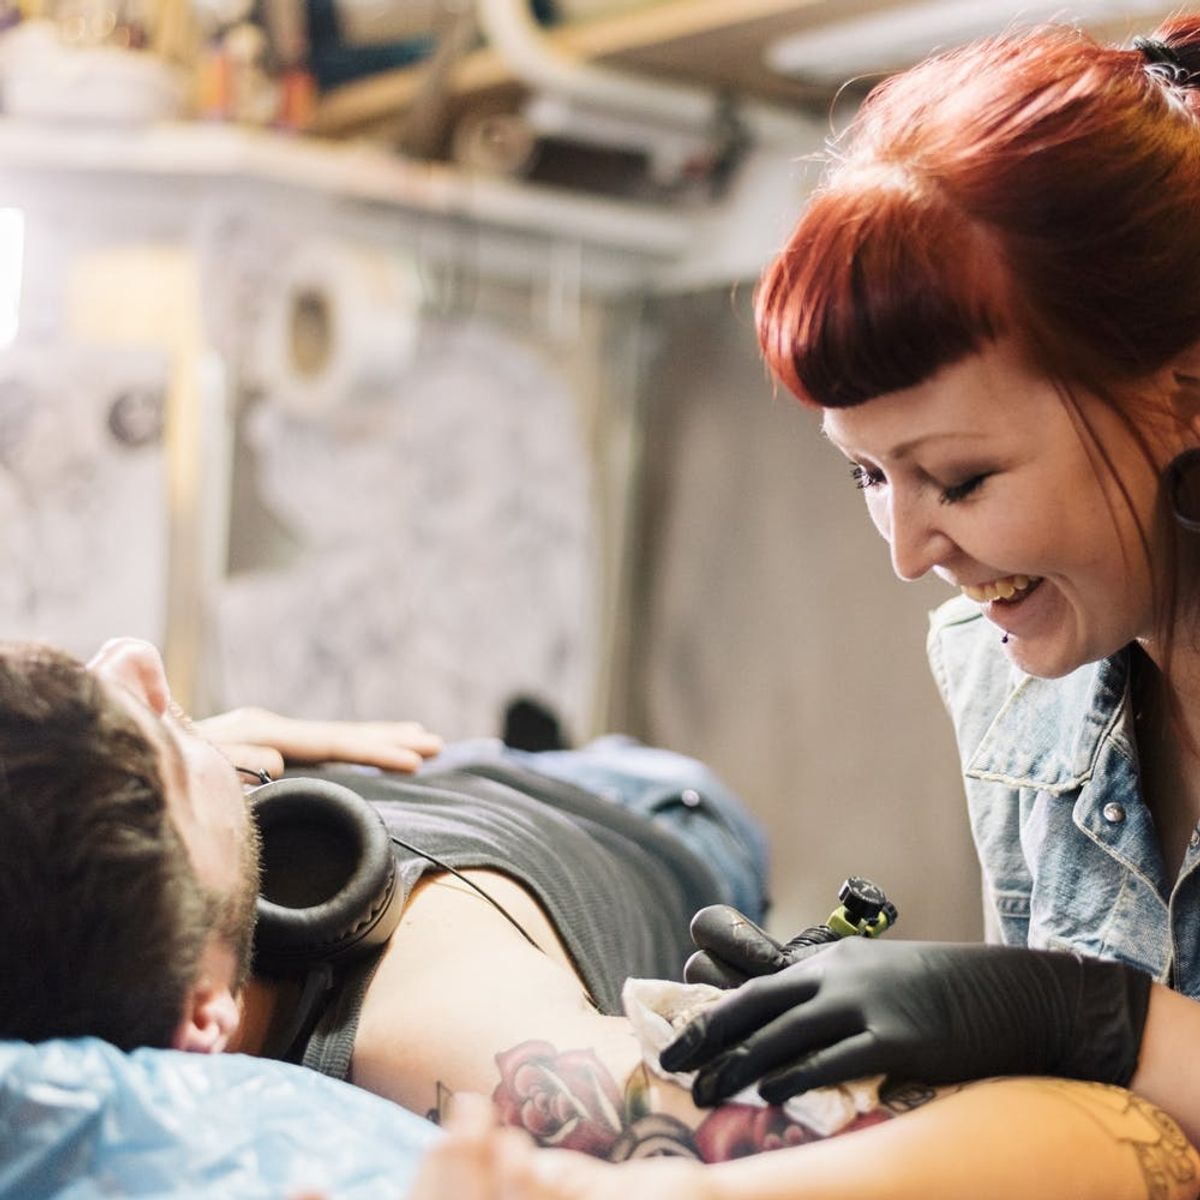 Science Says Tattoos Could Be Good for Your Health